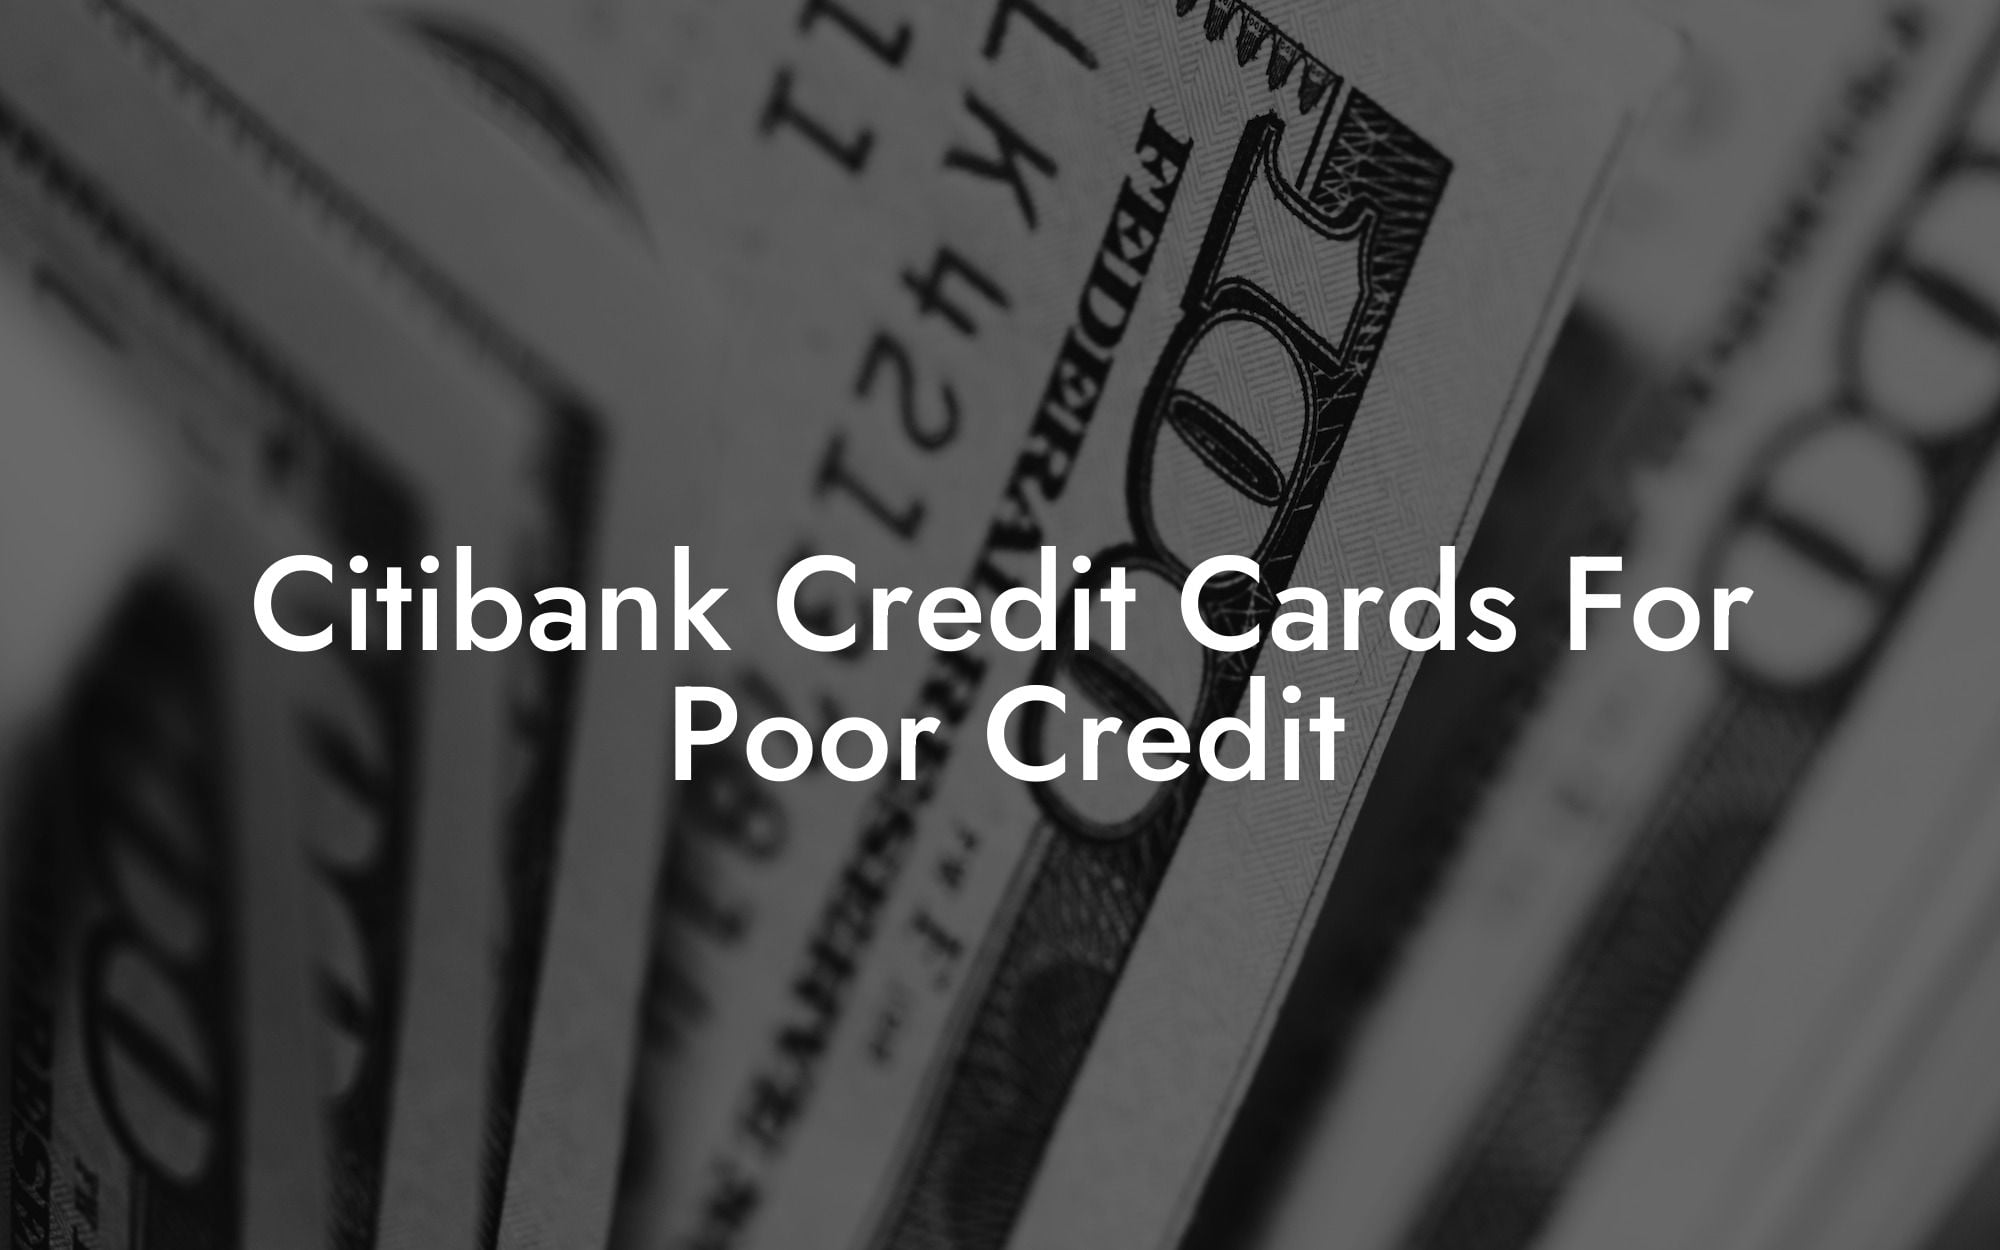 Citibank Credit Cards For Poor Credit